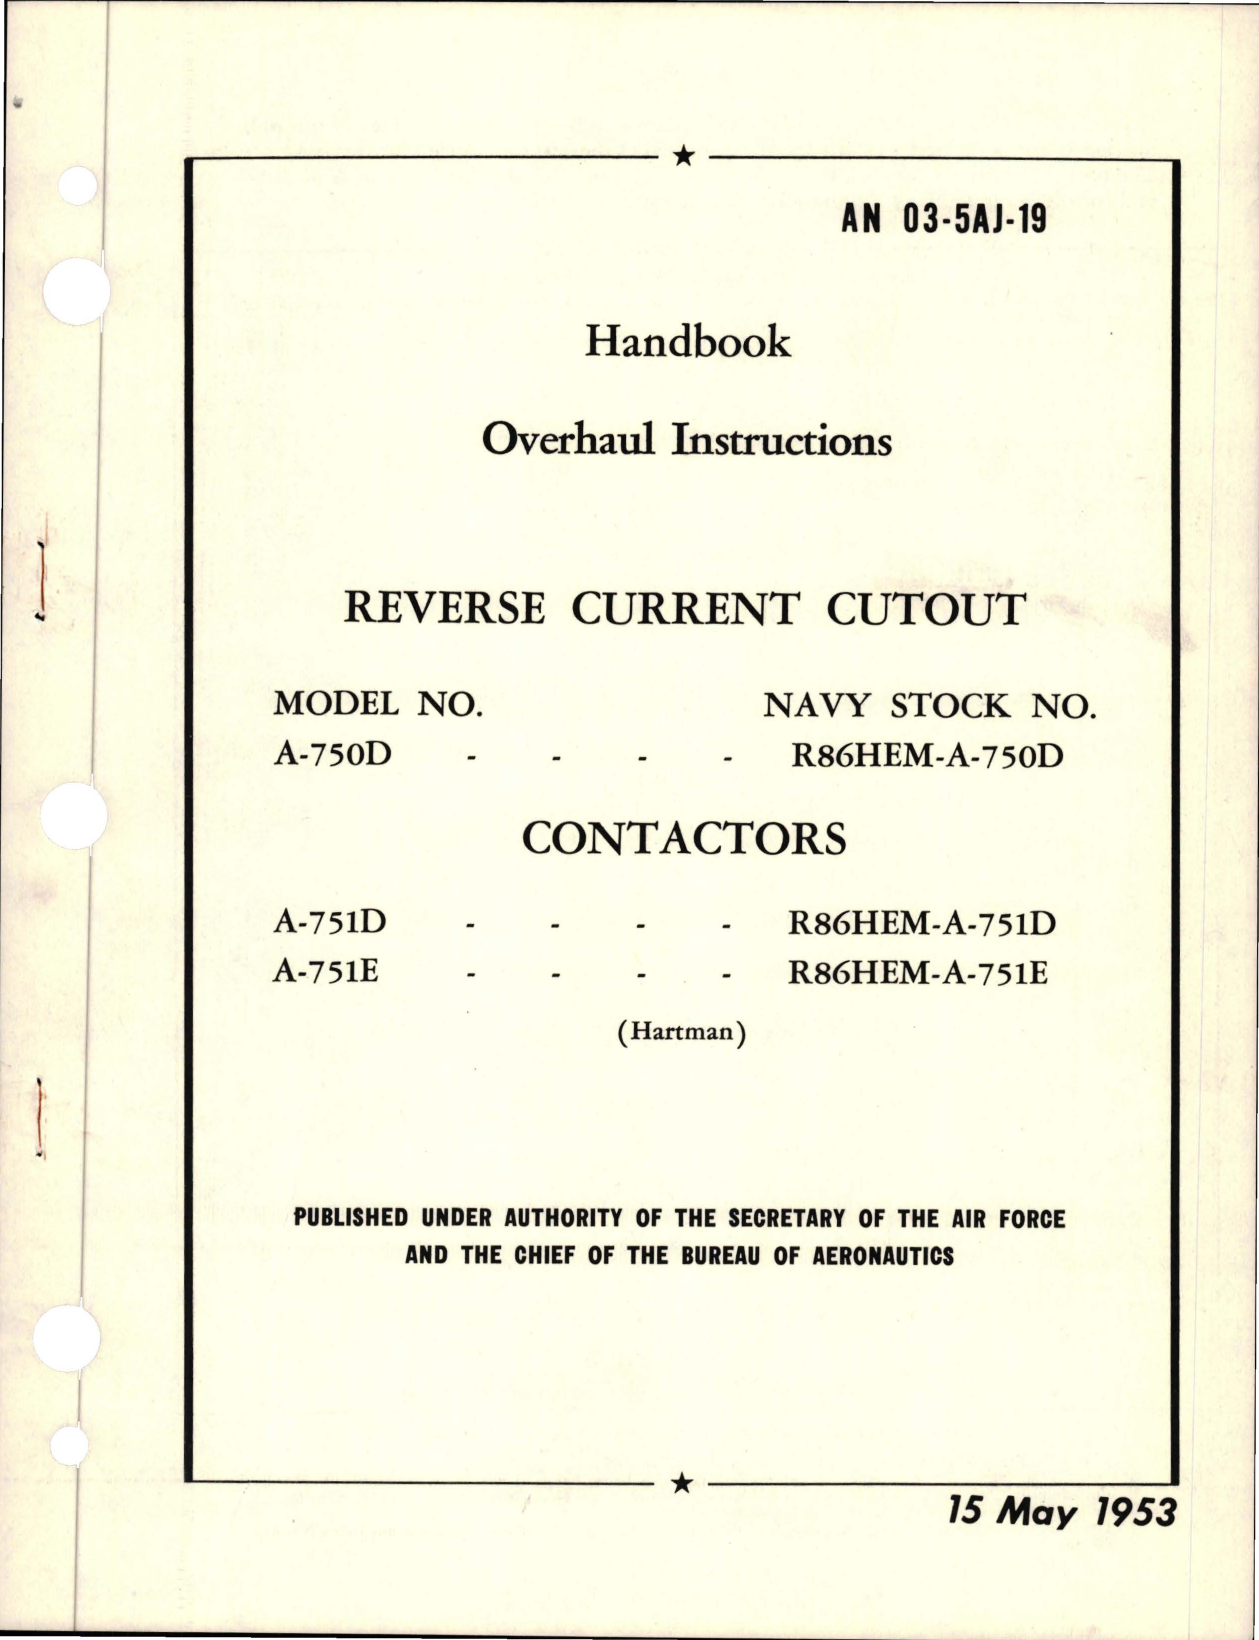 Sample page 1 from AirCorps Library document: Overhaul Instructions for Reverse Current Cutout - Model A-750D, and Contactors - A-751D and A-751E 